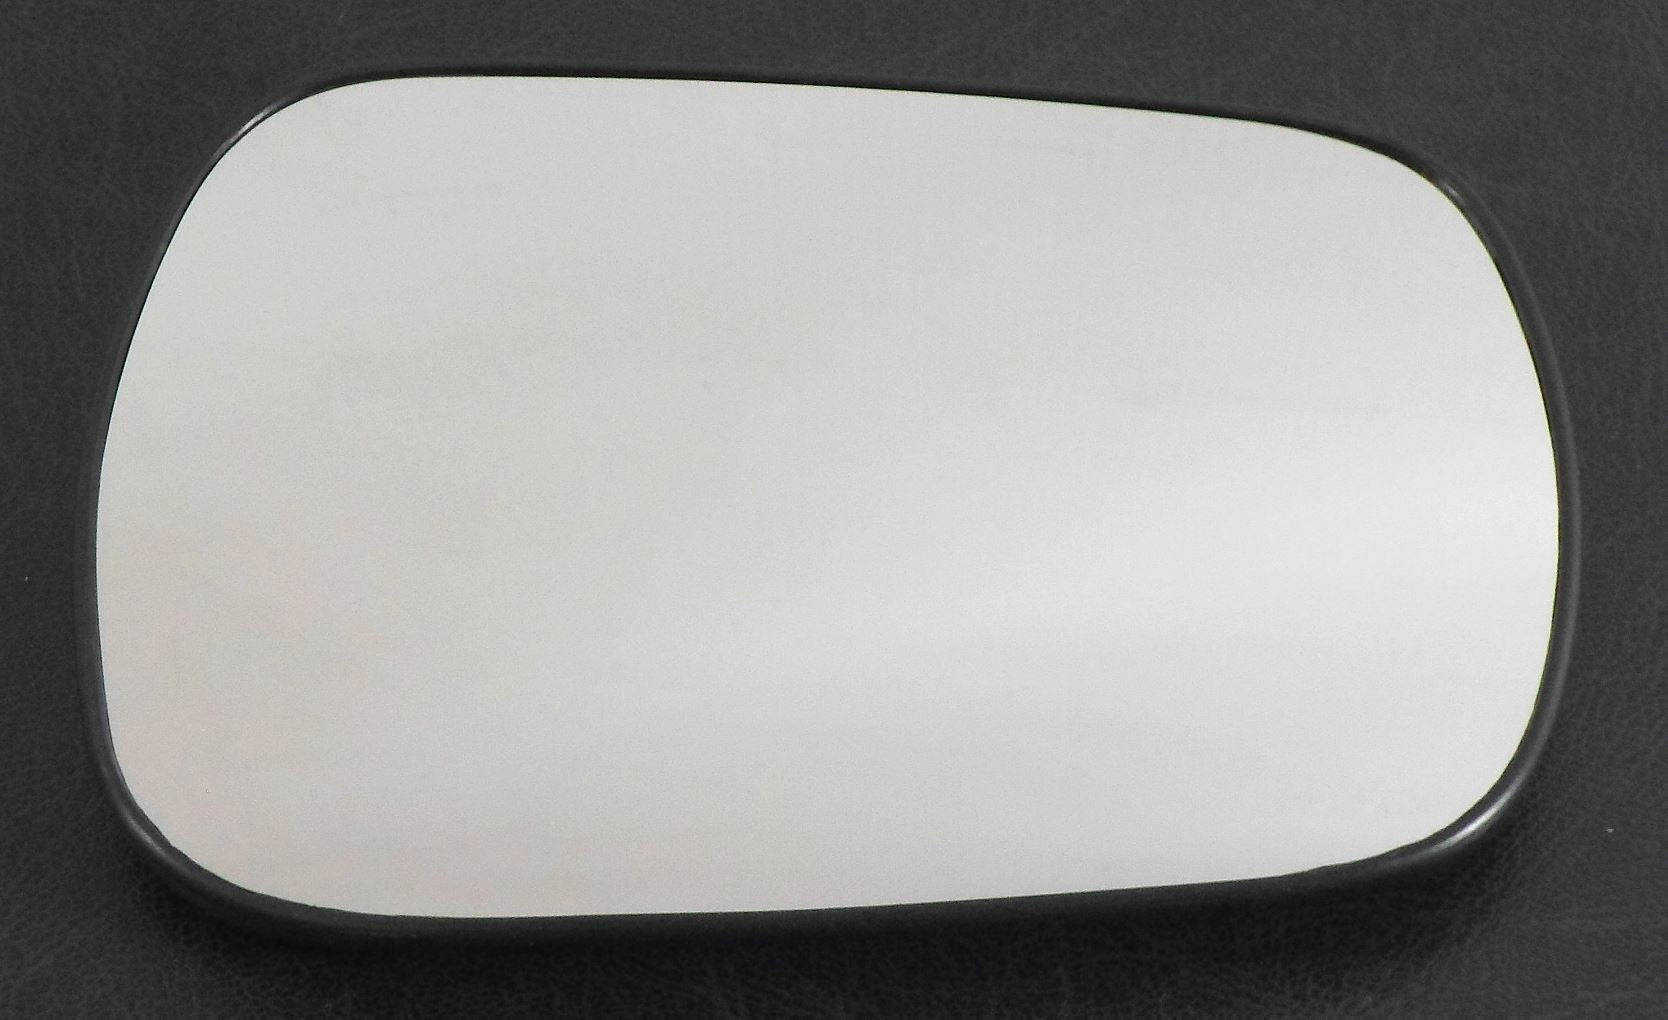 Ford Fusion 2002-2005 Heated Convex Mirror Glass Drivers Side O/S